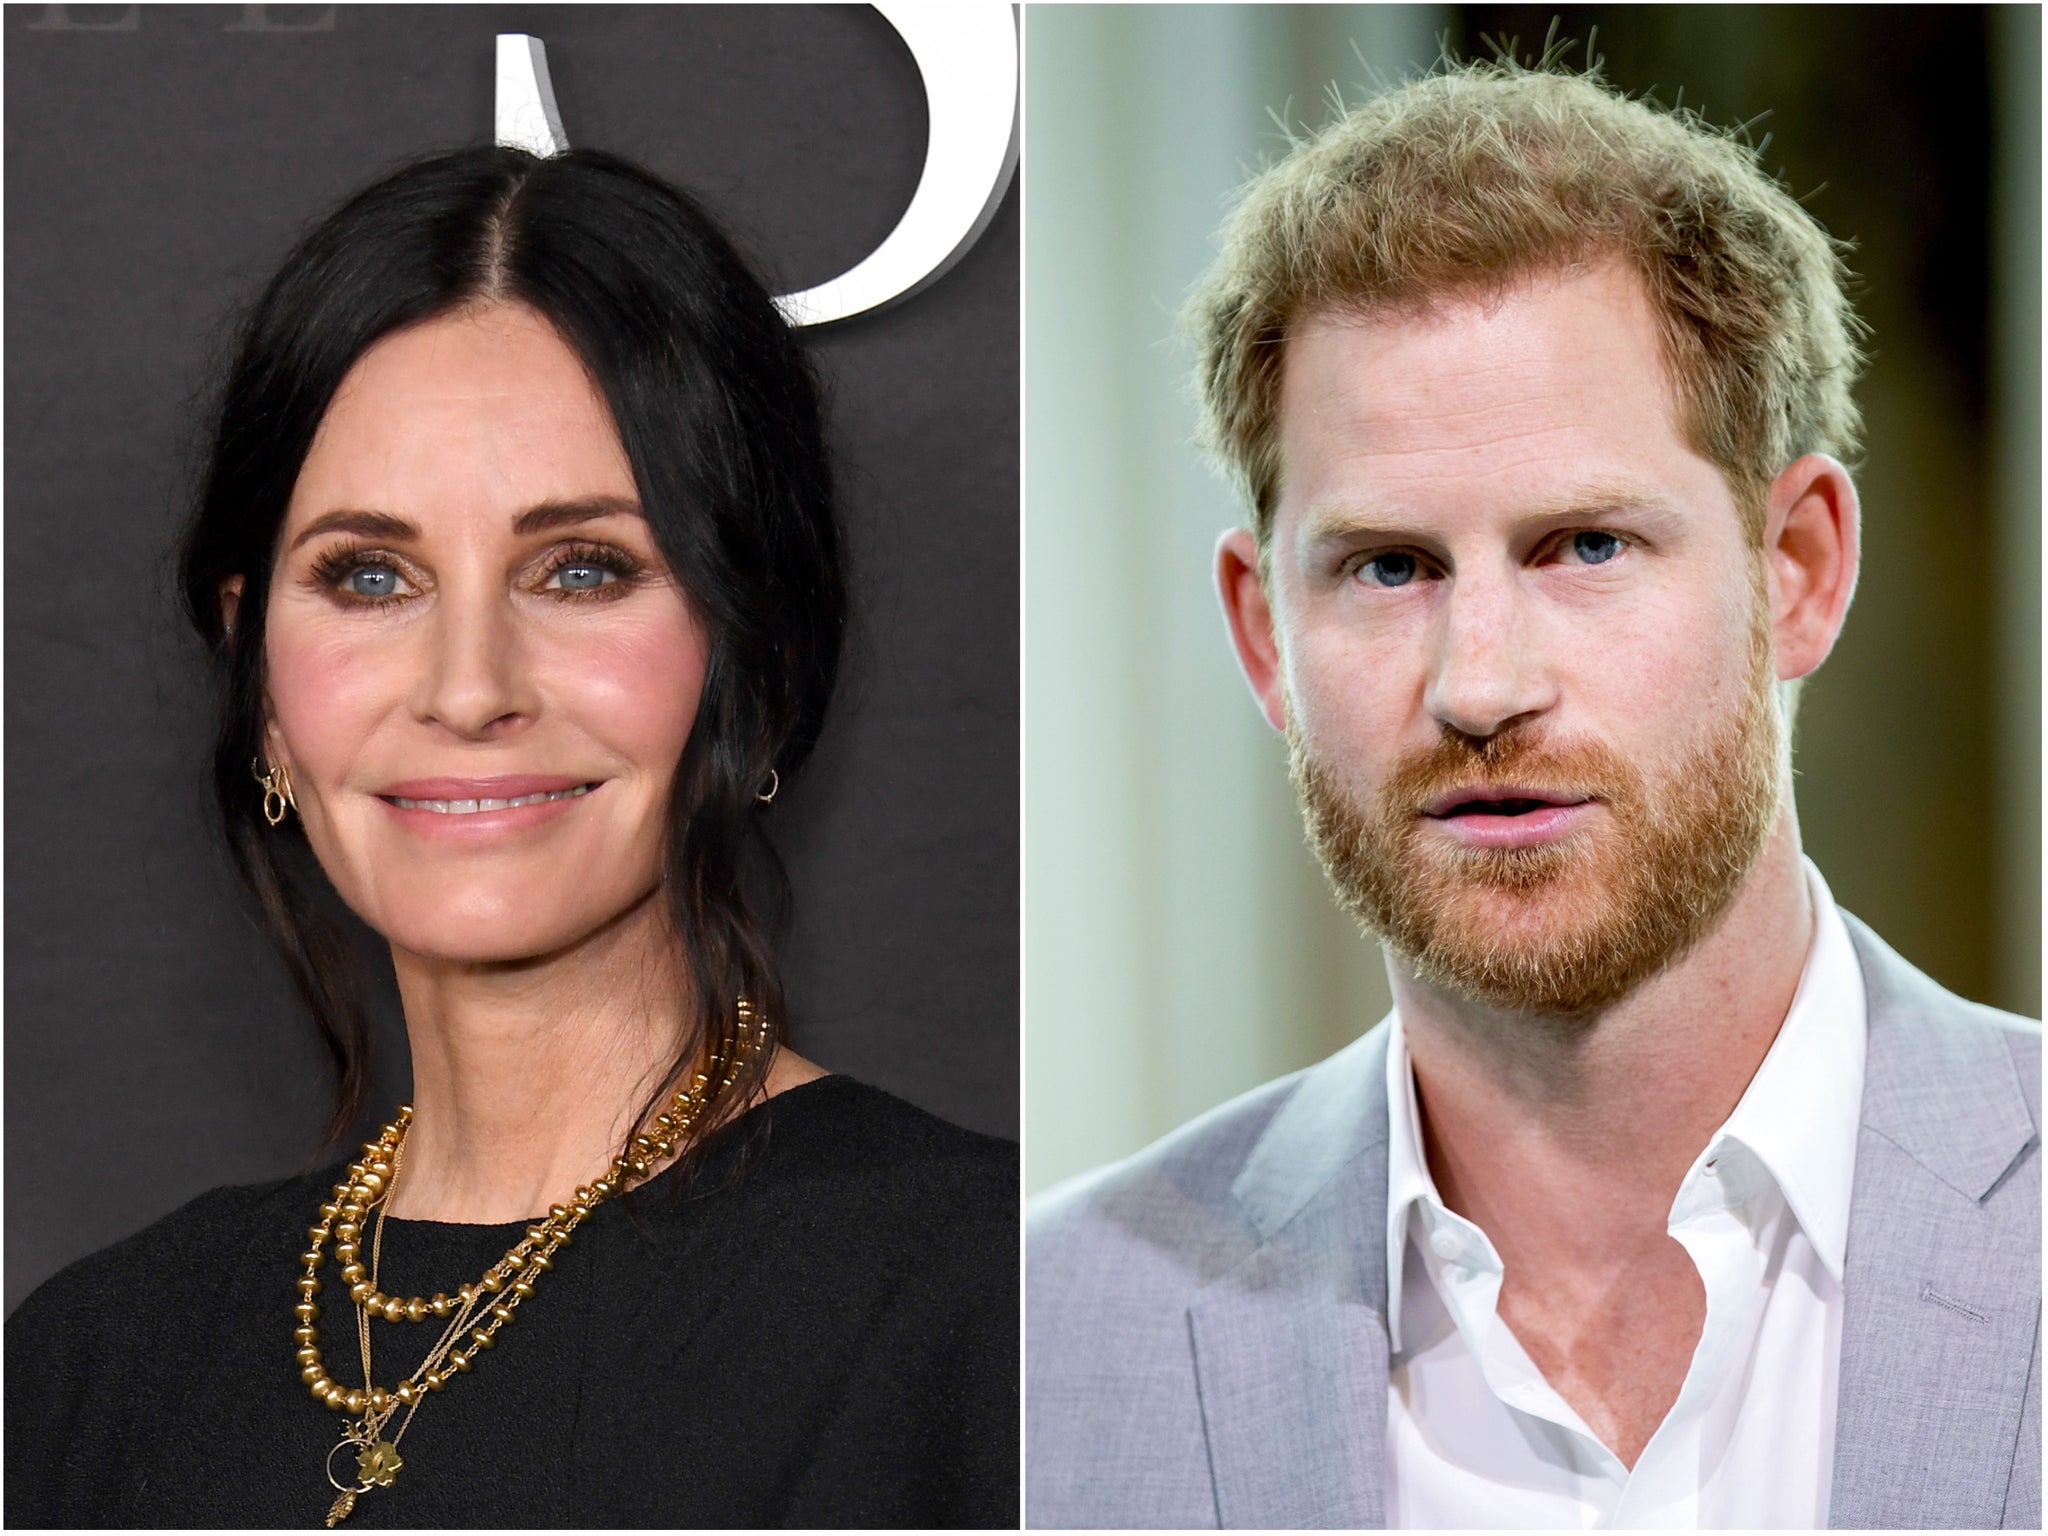 Courteney Cox (left) and Prince Harry